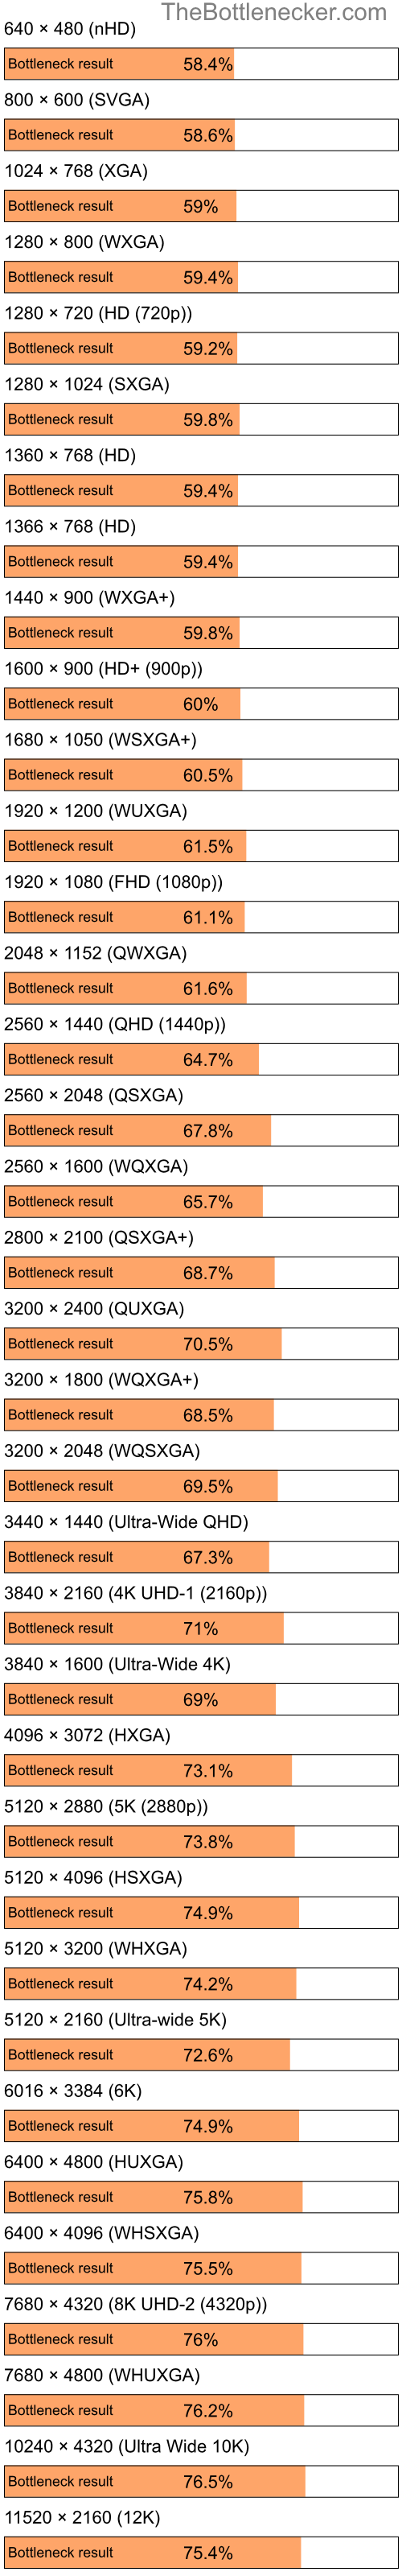 Bottleneck results by resolution for Intel Pentium 4 and AMD Radeon X700 PRO in Processor Intense Tasks